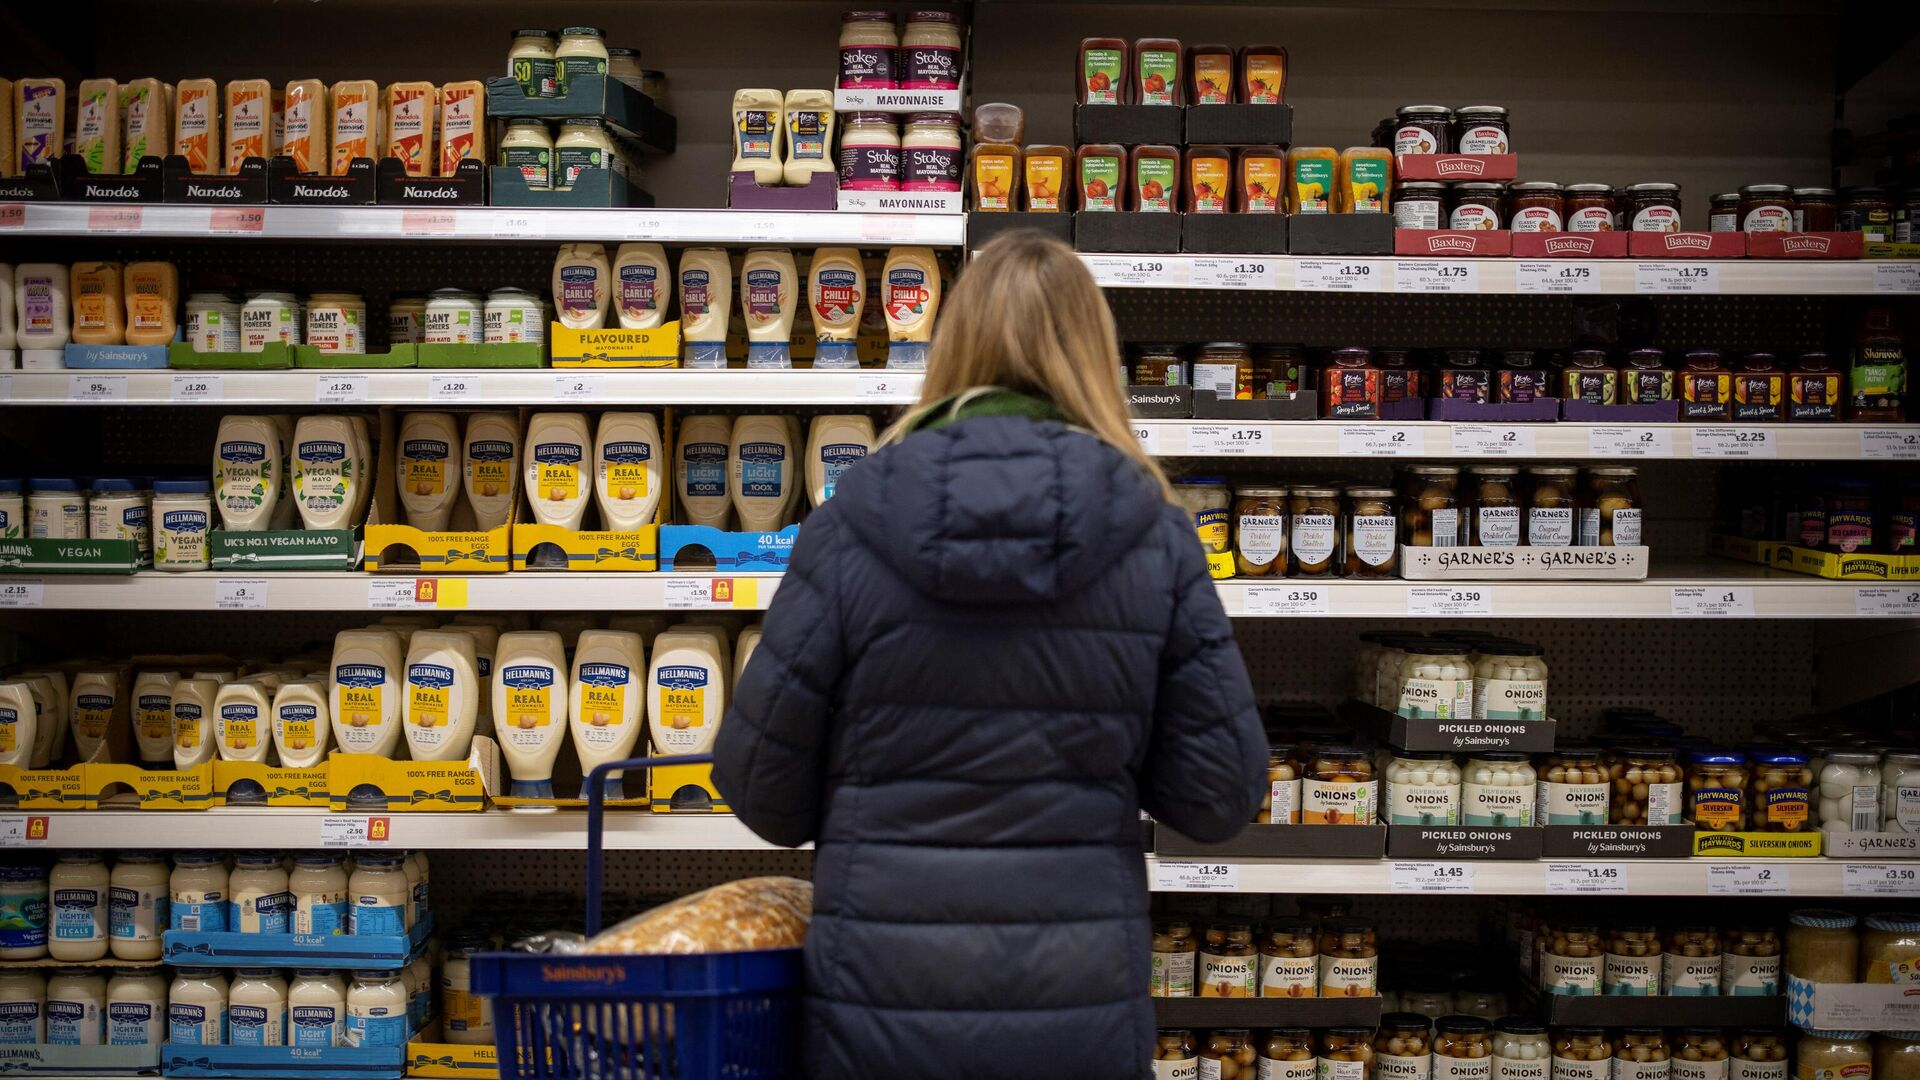 A customer shops for mayonnaise and condiments at a Sainsbury's supermarket in Walthamstow, east London on February 13, 2022 - Sputnik International, 1920, 24.03.2022